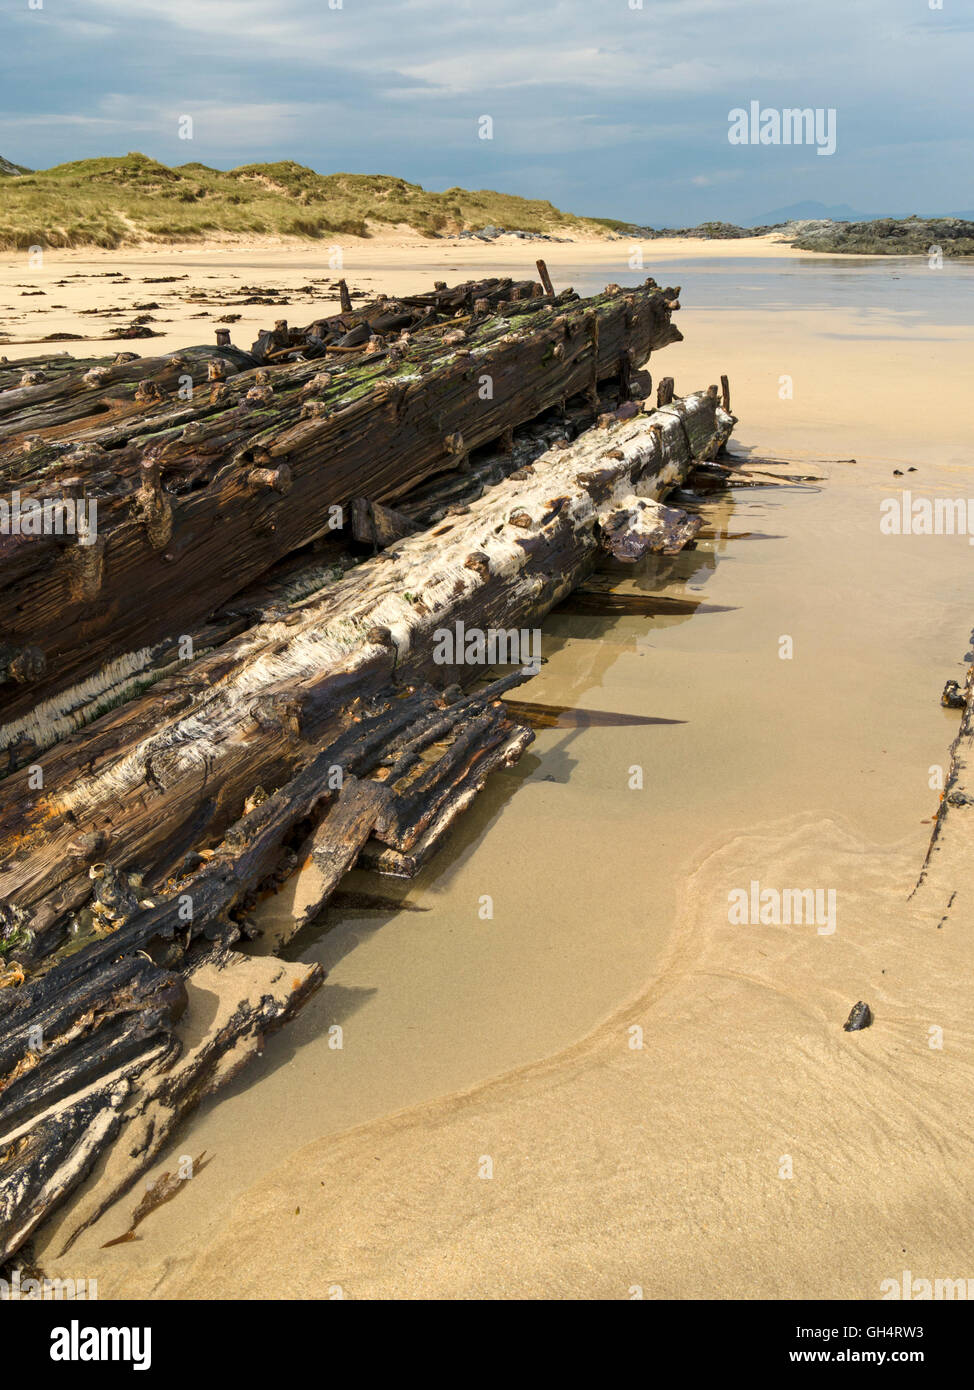 Old wrecked wooden ship's timbers and rusty nails buried in sands of Balnahard Beach, Isle of Colonsay, Scotland, UK. Stock Photo